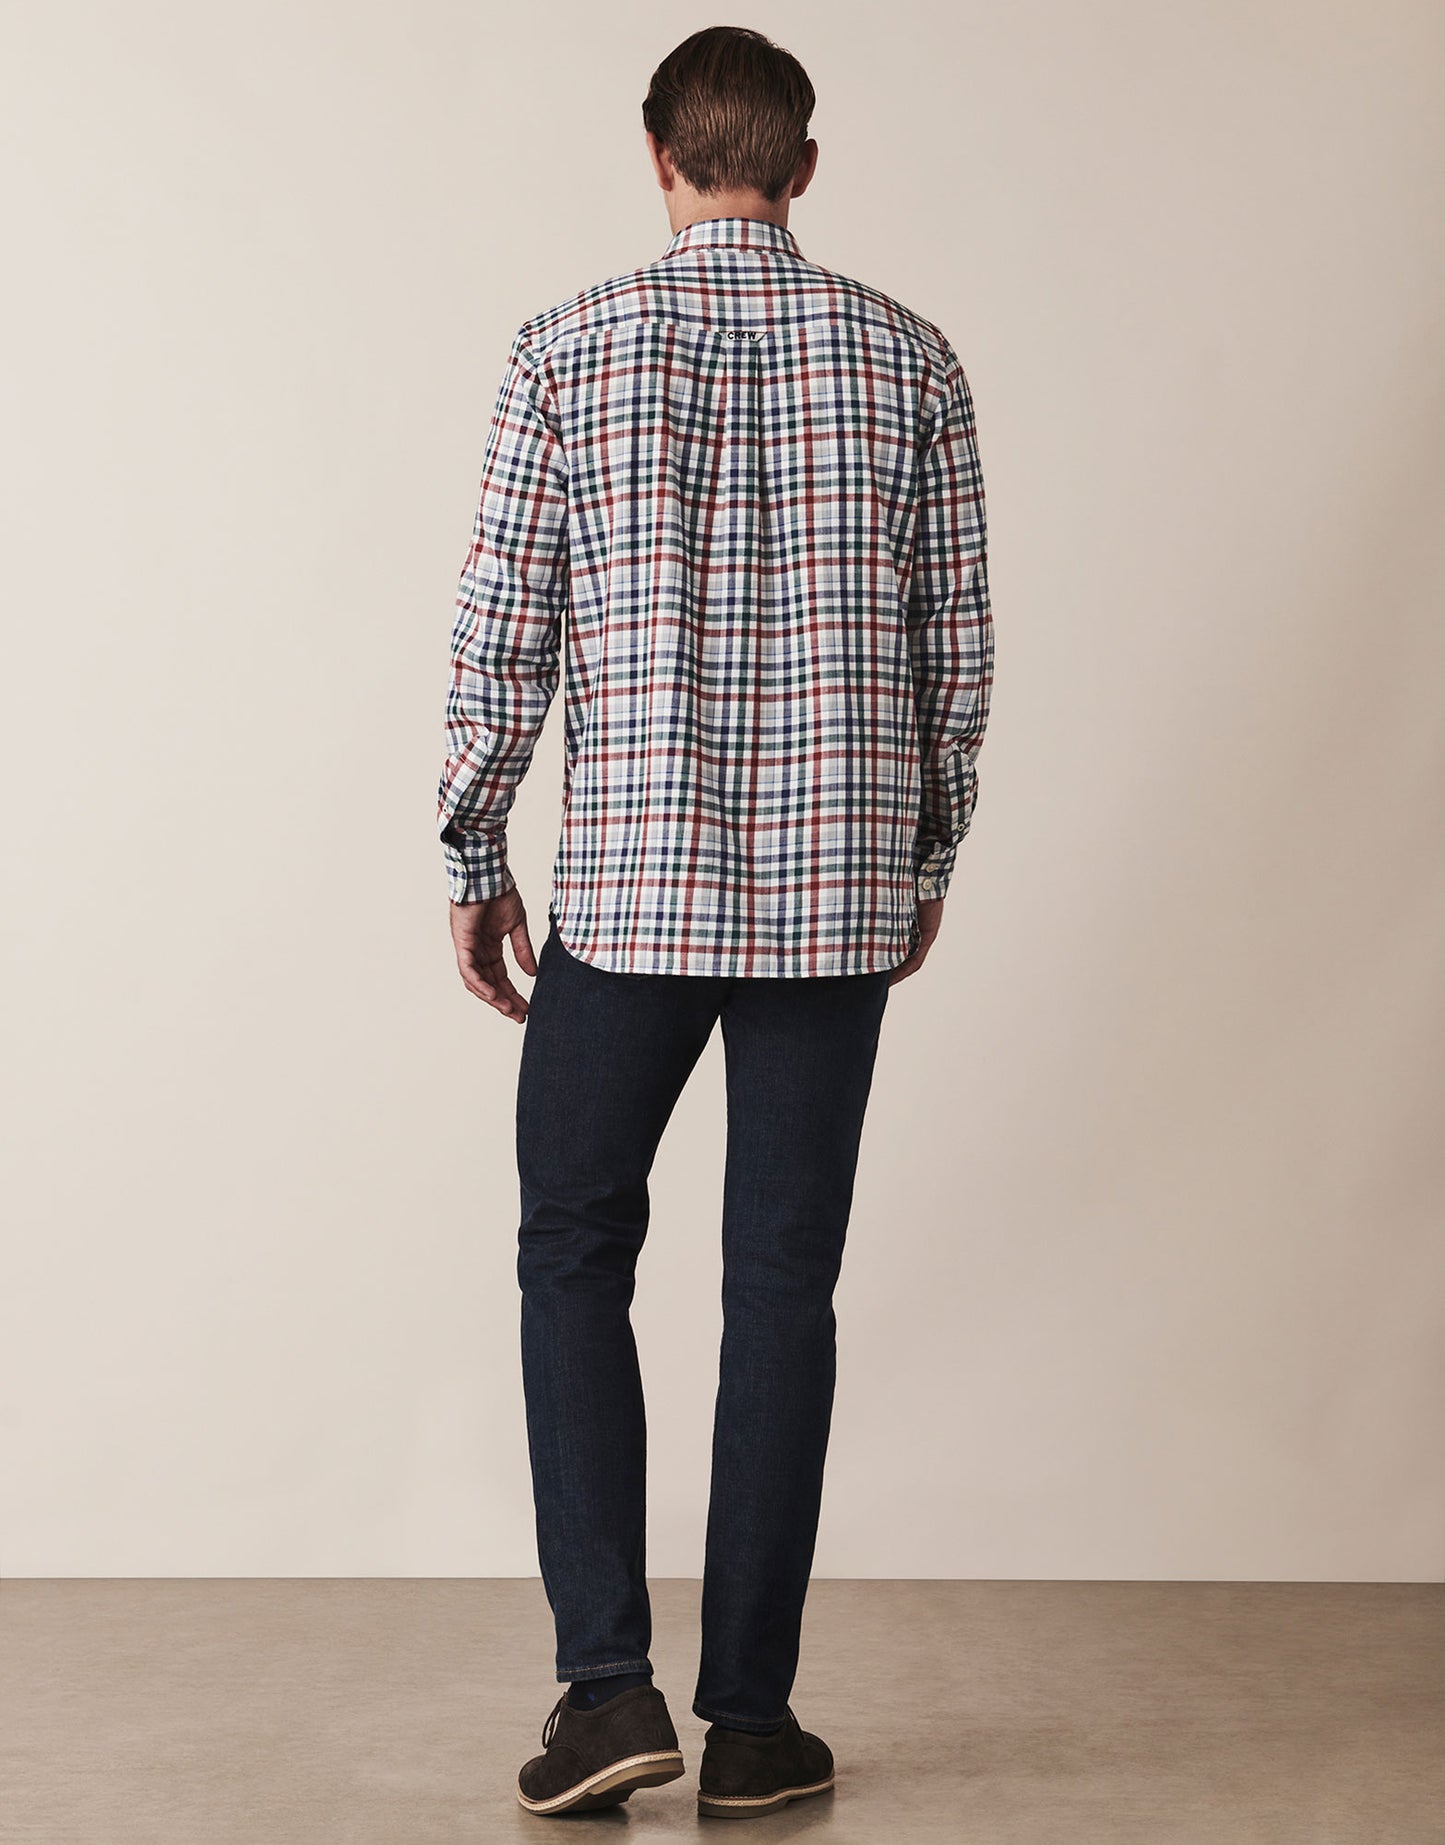 Crew Clothing Classic Check Flannel Shirt